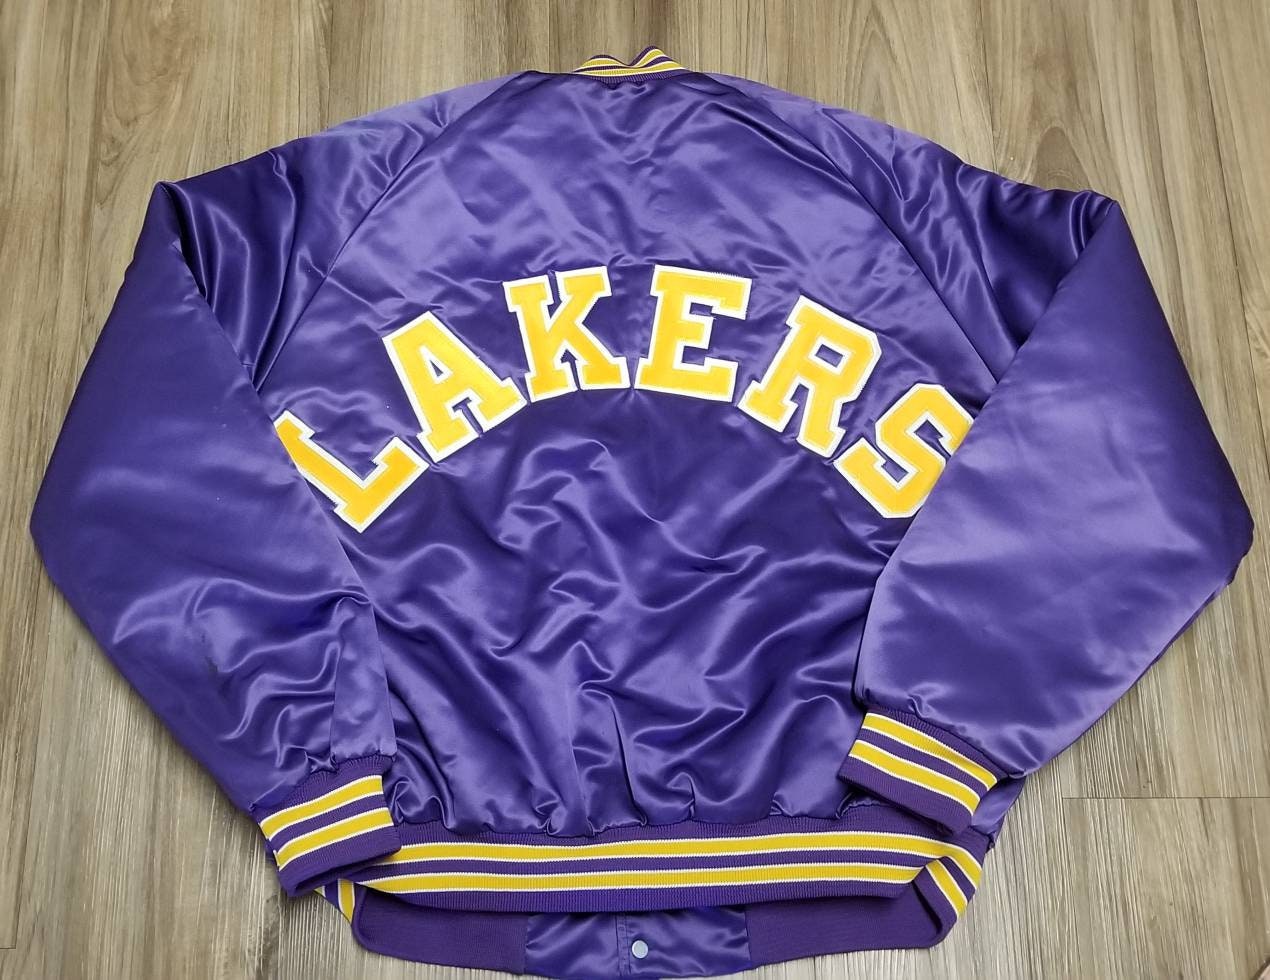 80s Vintage Red Lakers Baseball-Style Jacket – The Hip Zipper